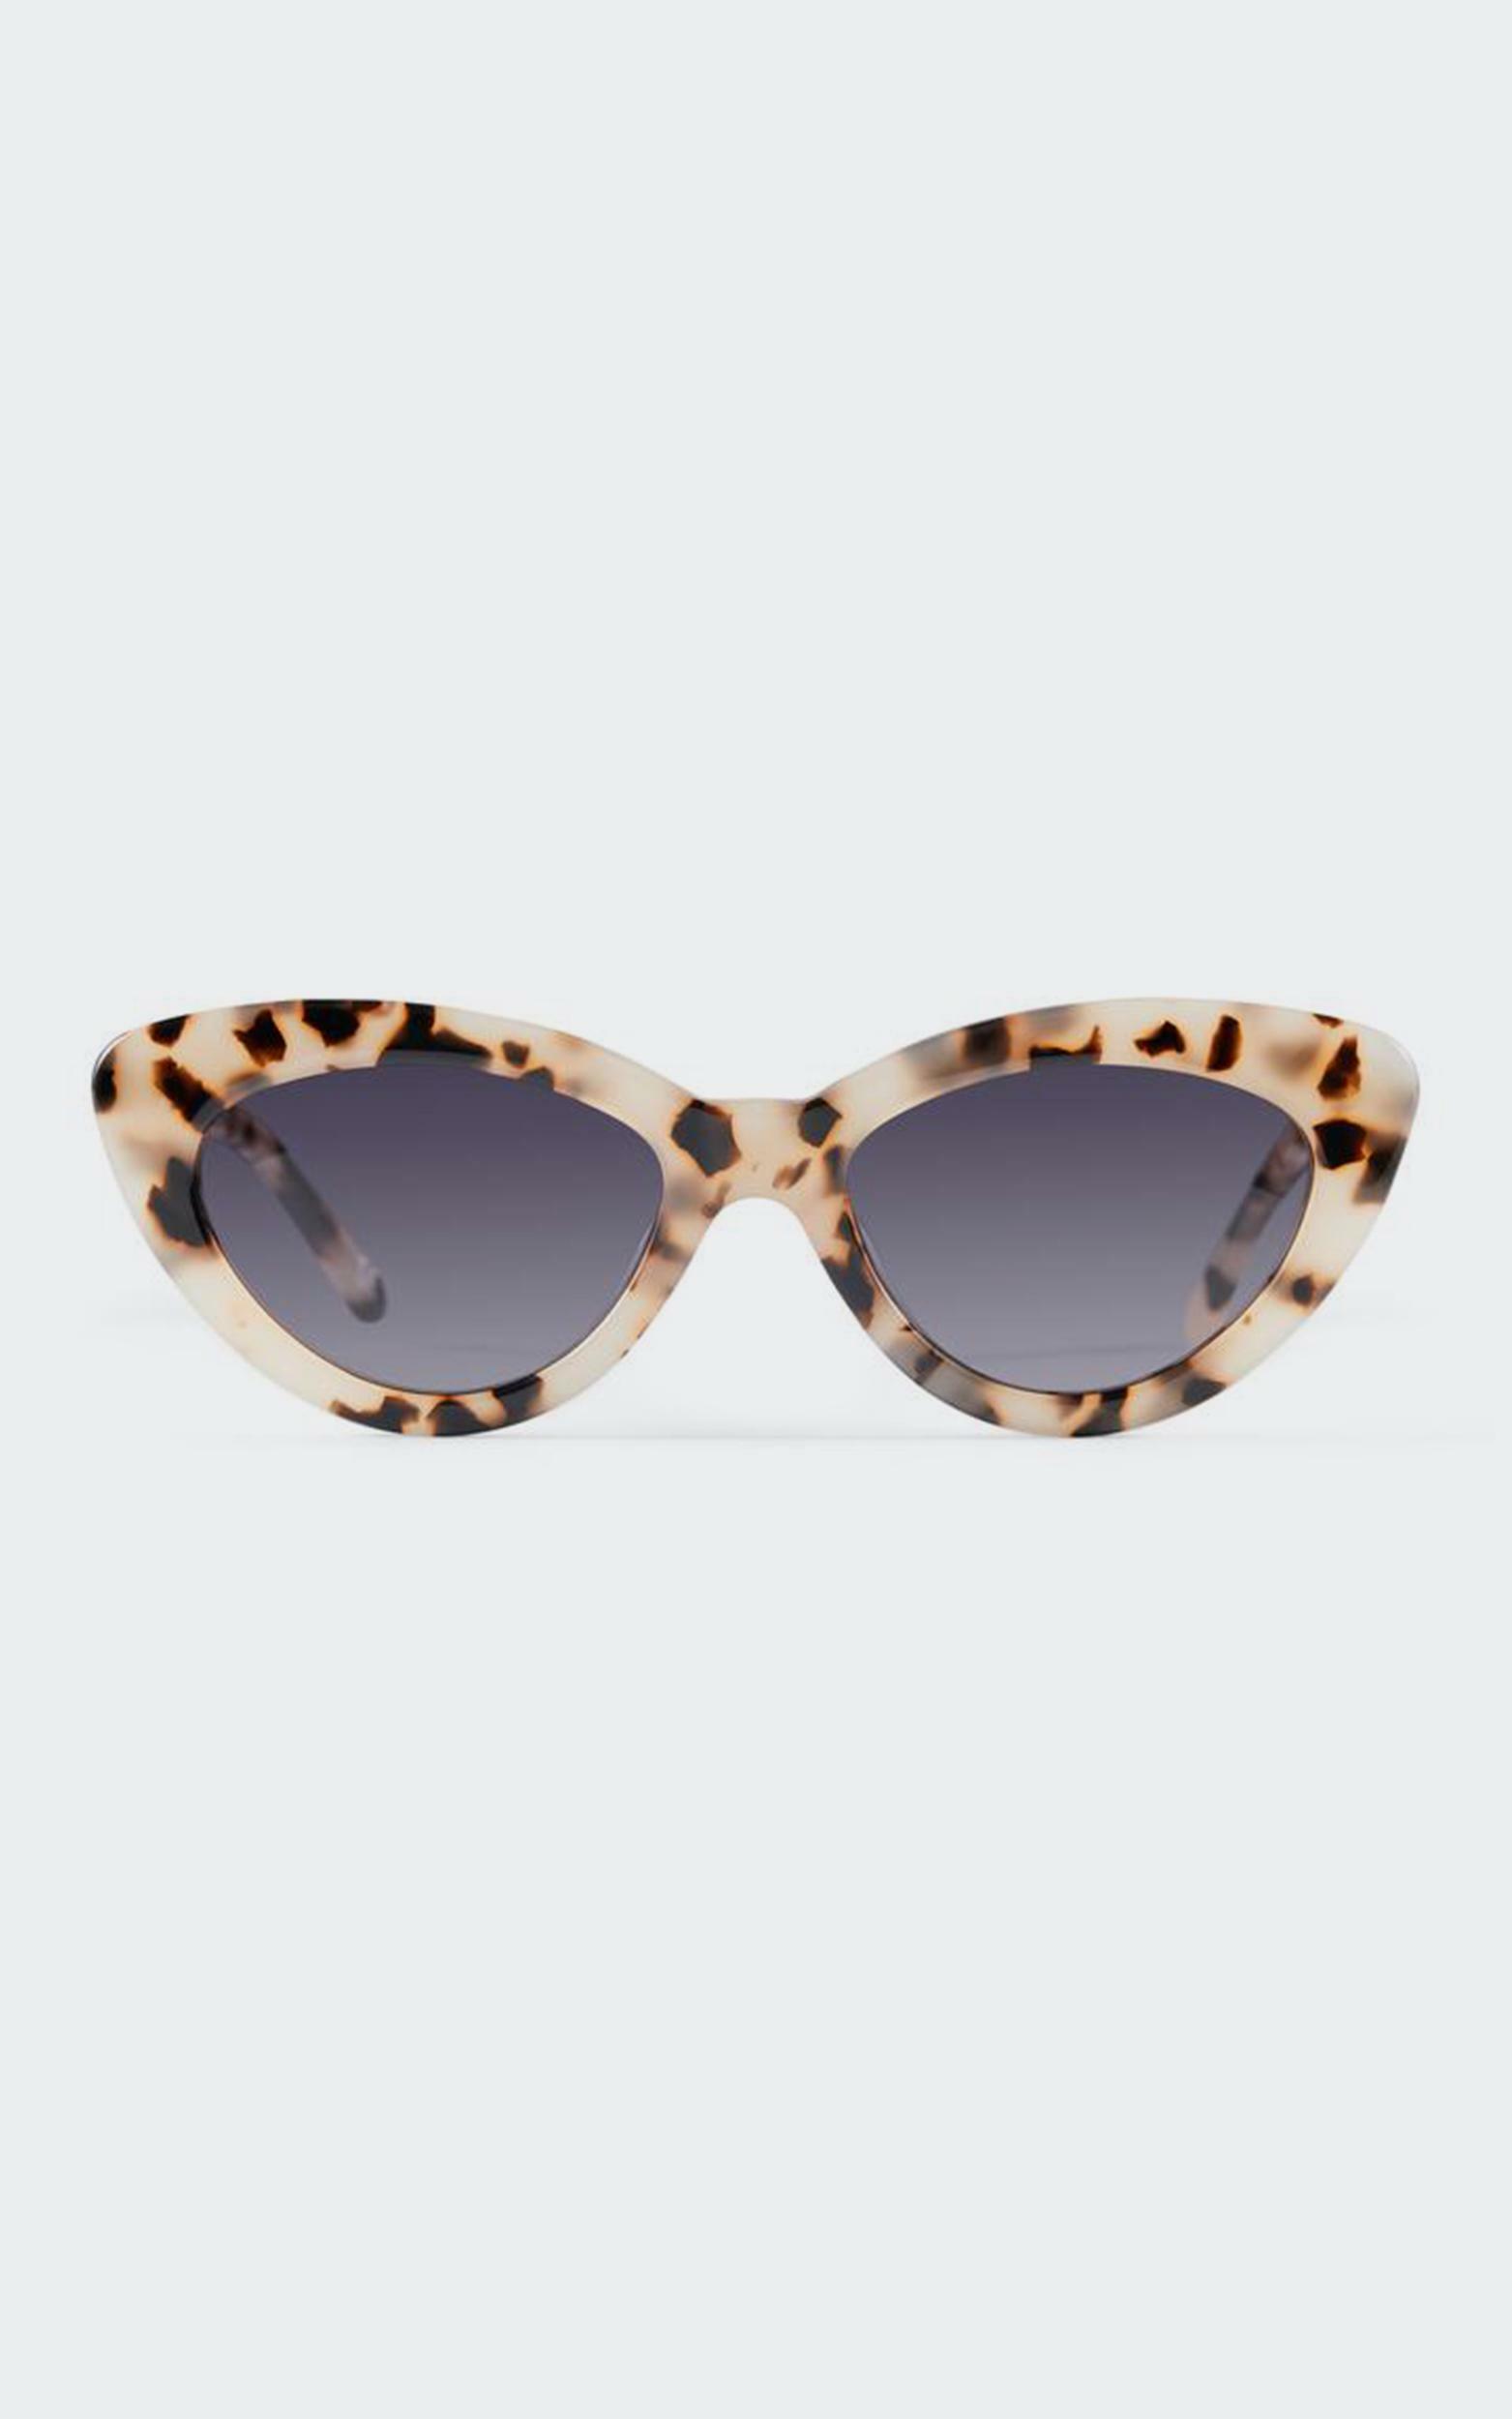 Luv Lou - The Harley Sunglasses in Cream Tort, CRE1, hi-res image number null